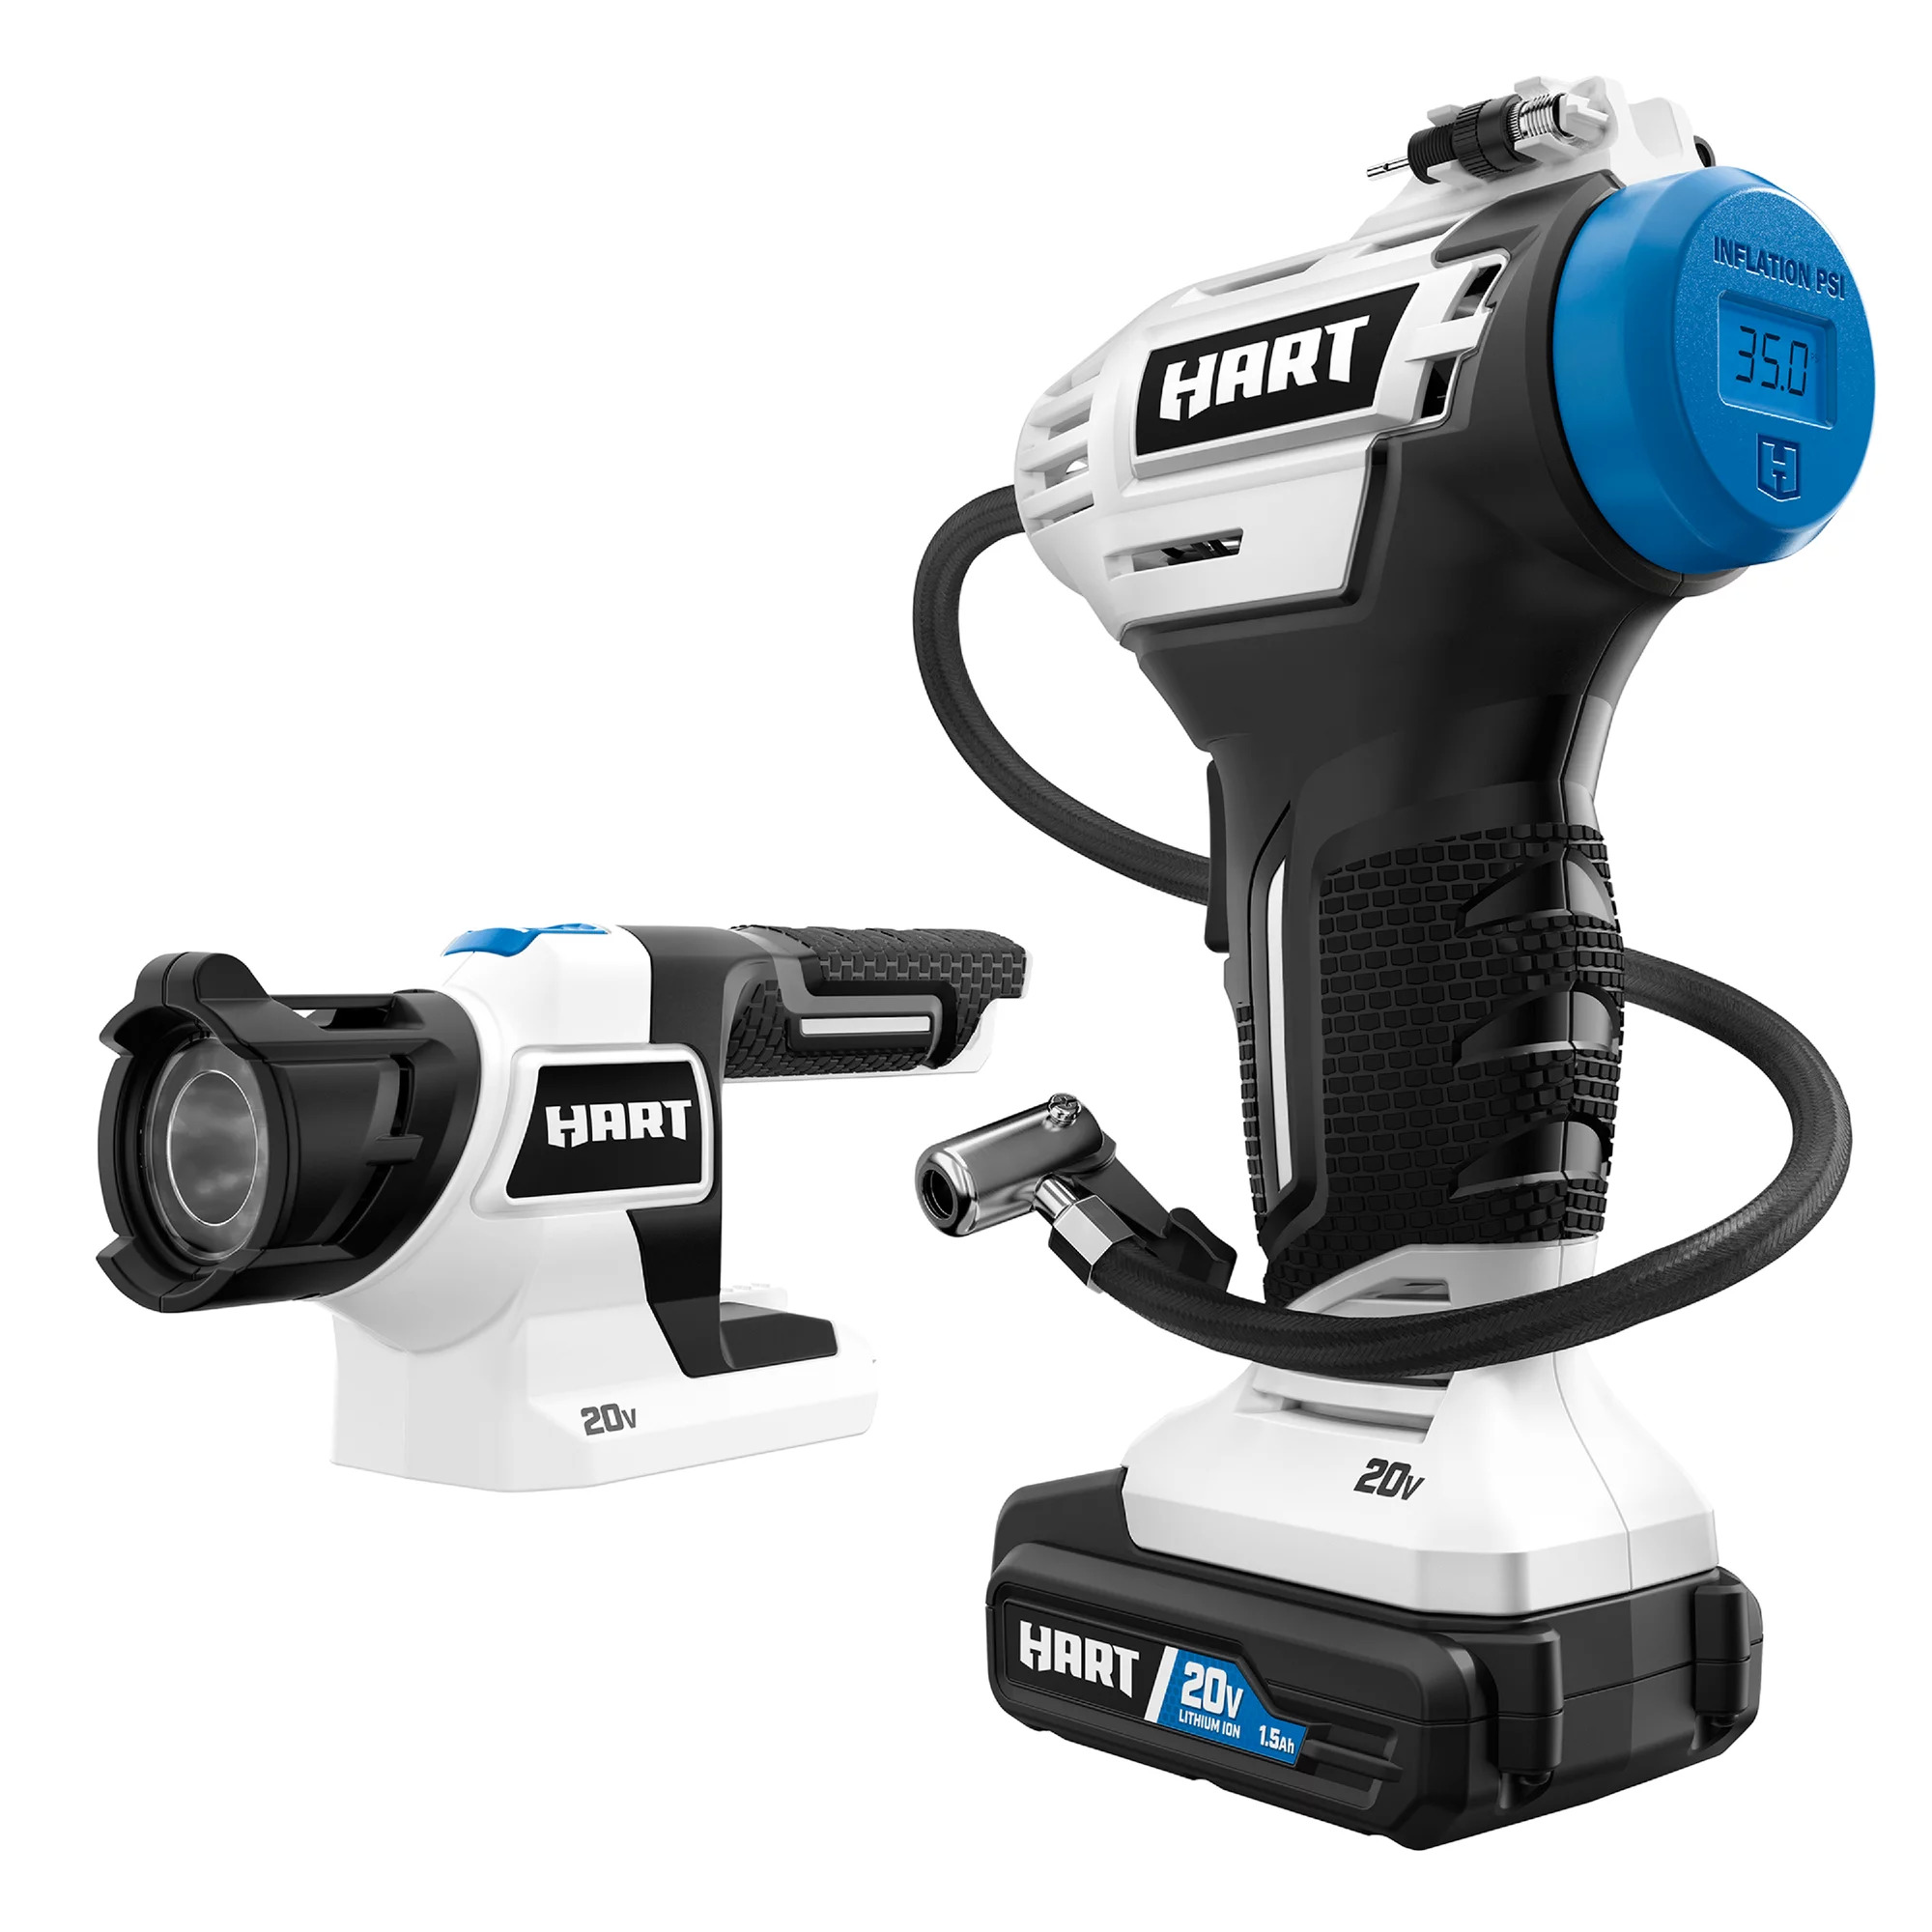 HART 20V Cordless Inflator & LED Light Kit w/ 1.5Ah Lithium-ion Battery & Charger $29 Free Shipping